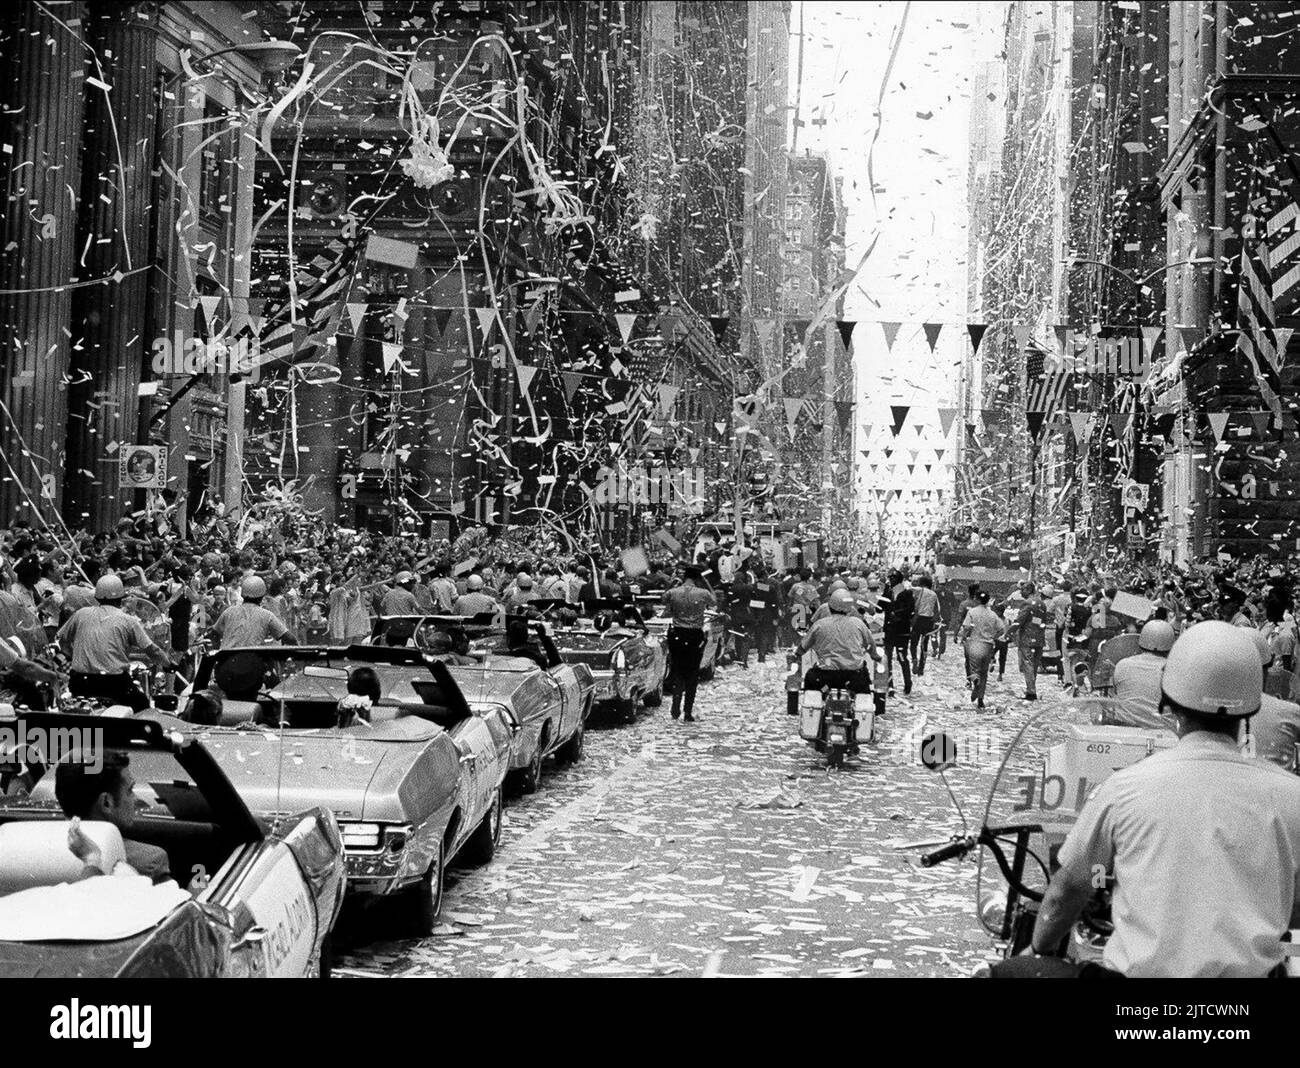 APOLLO 11 TICKER TAPE CELEBRATIONS, IN THE SHADOW OF THE MOON, 2007 Stock Photo